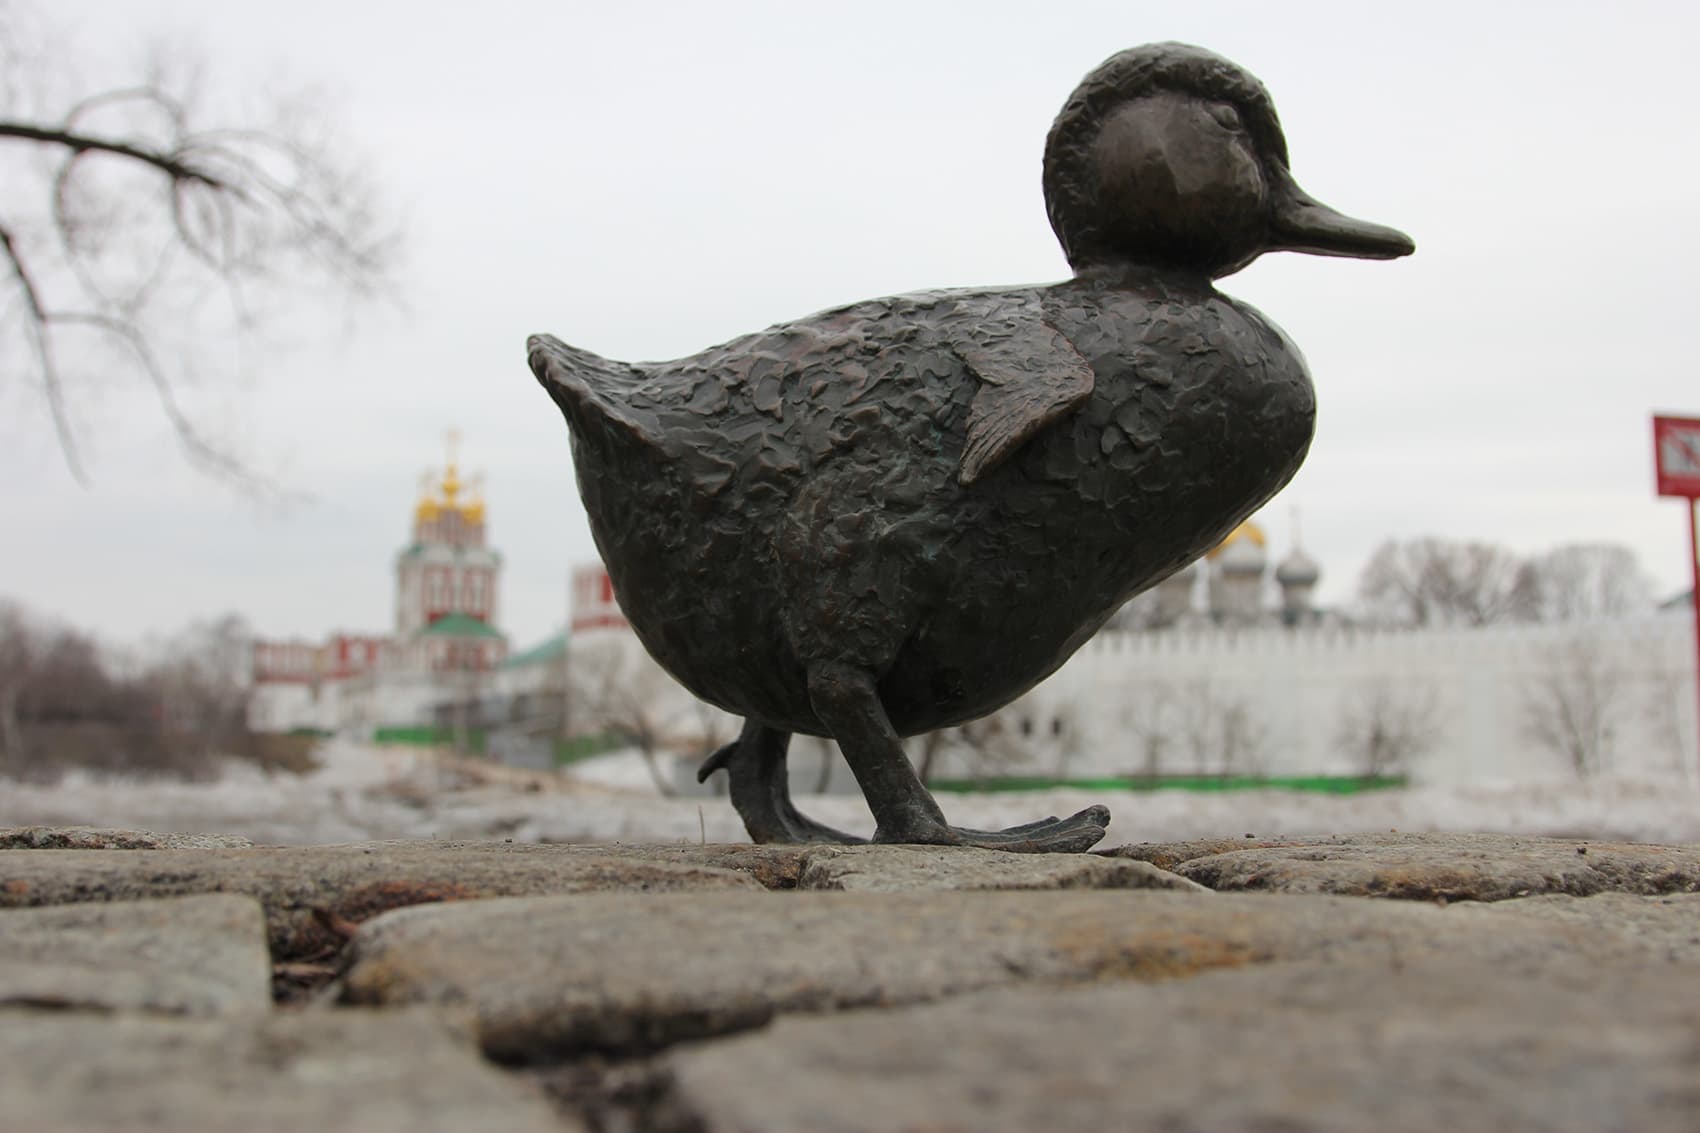 Jack, Kack, Lack, Mack, Nack, Ouack, Pack and Quack have siblings that live in a Moscow park. (Courtesy Dmitry Avdoshin)